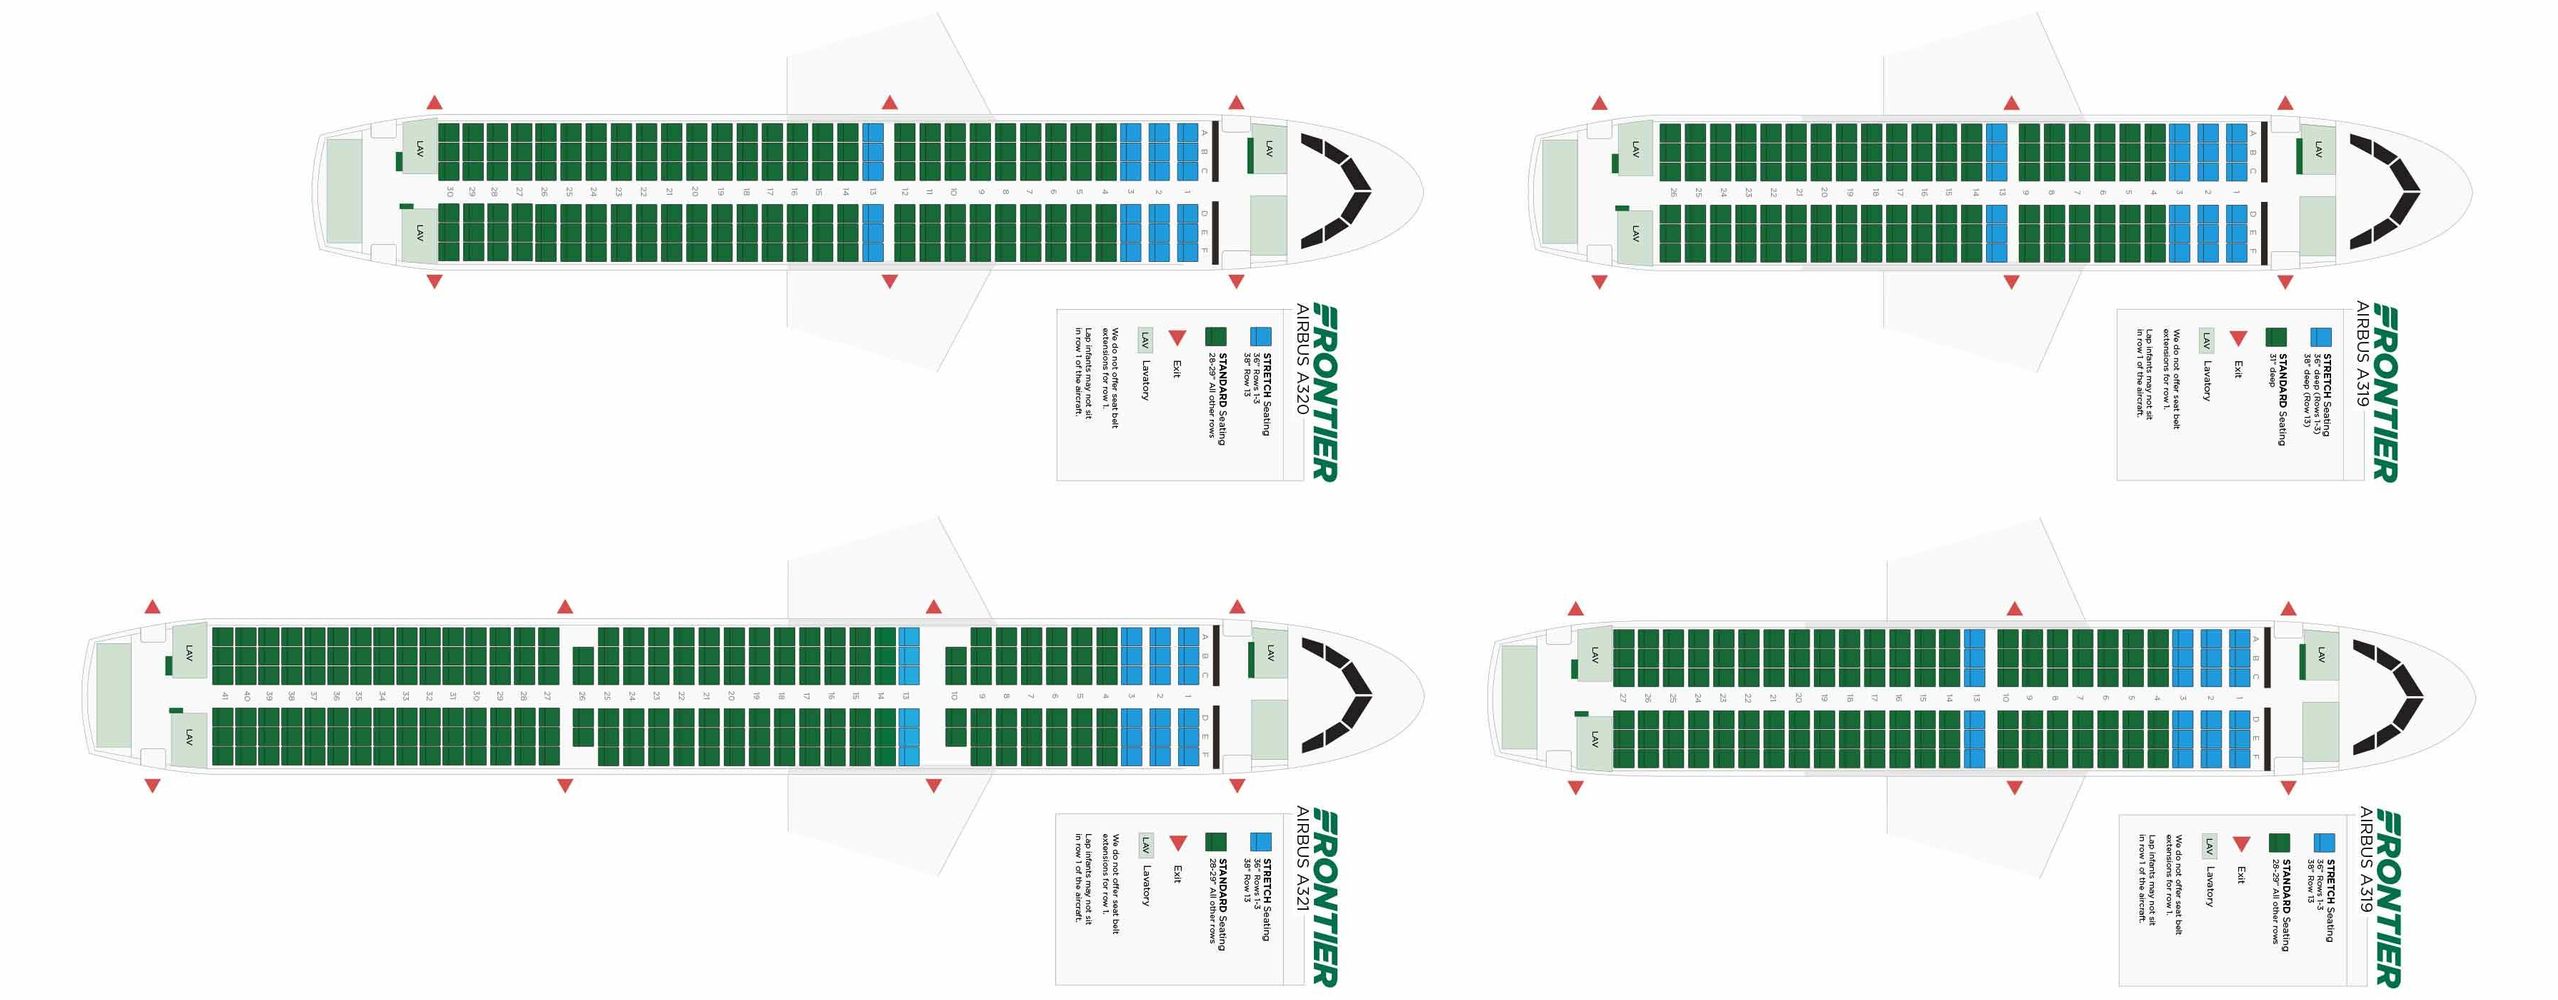 Frontier Airlines Plane Layout Are Frontier's Stretch Seats Worth The Money?